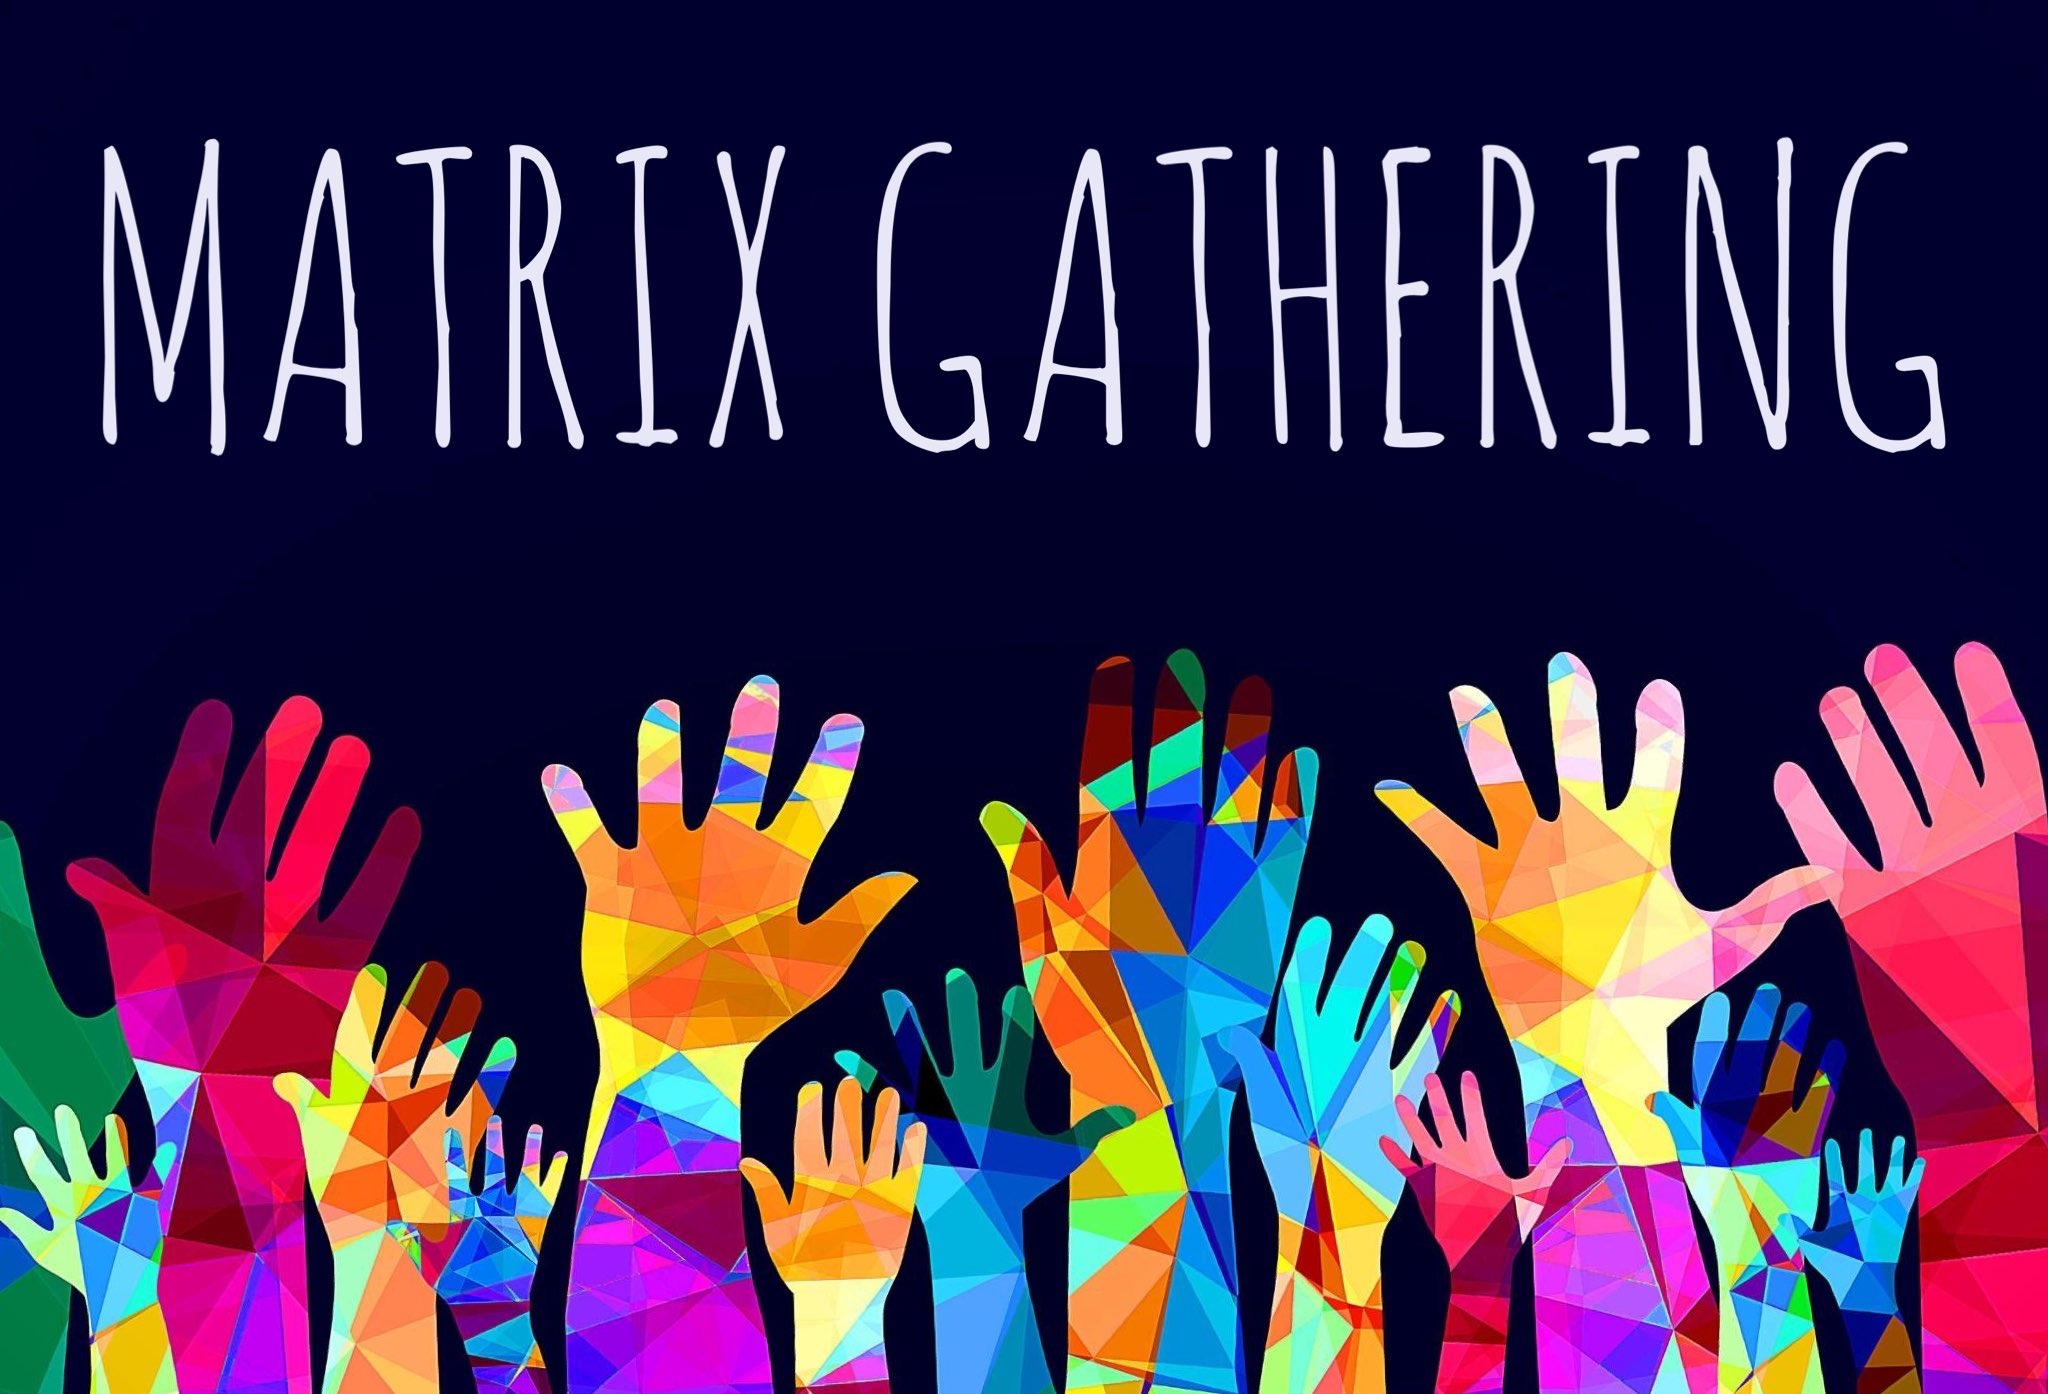 Matrix Gathering: Learn, Discover, Deepen